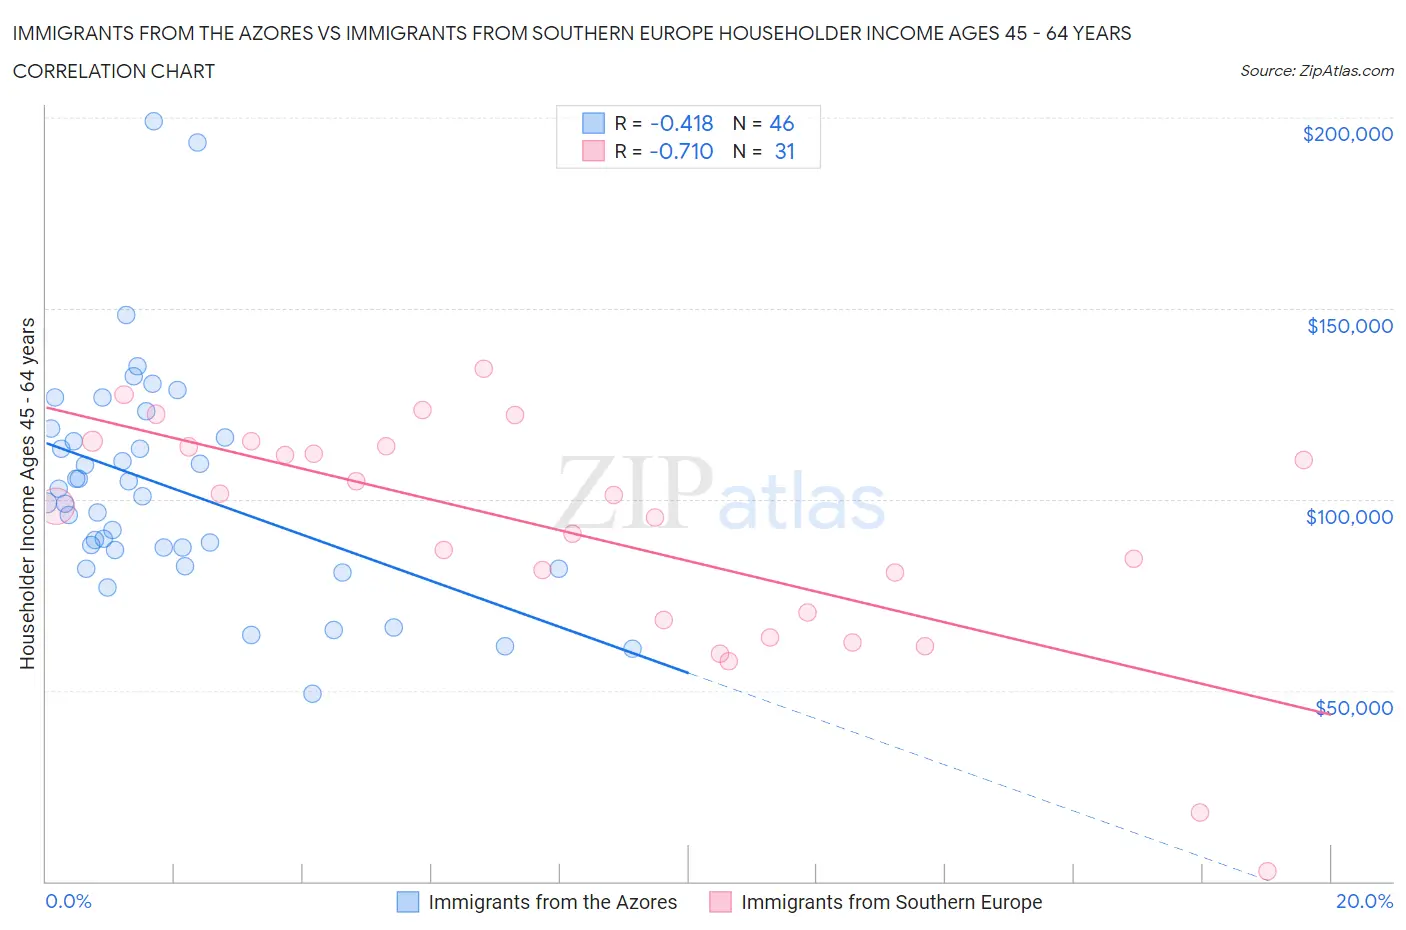 Immigrants from the Azores vs Immigrants from Southern Europe Householder Income Ages 45 - 64 years